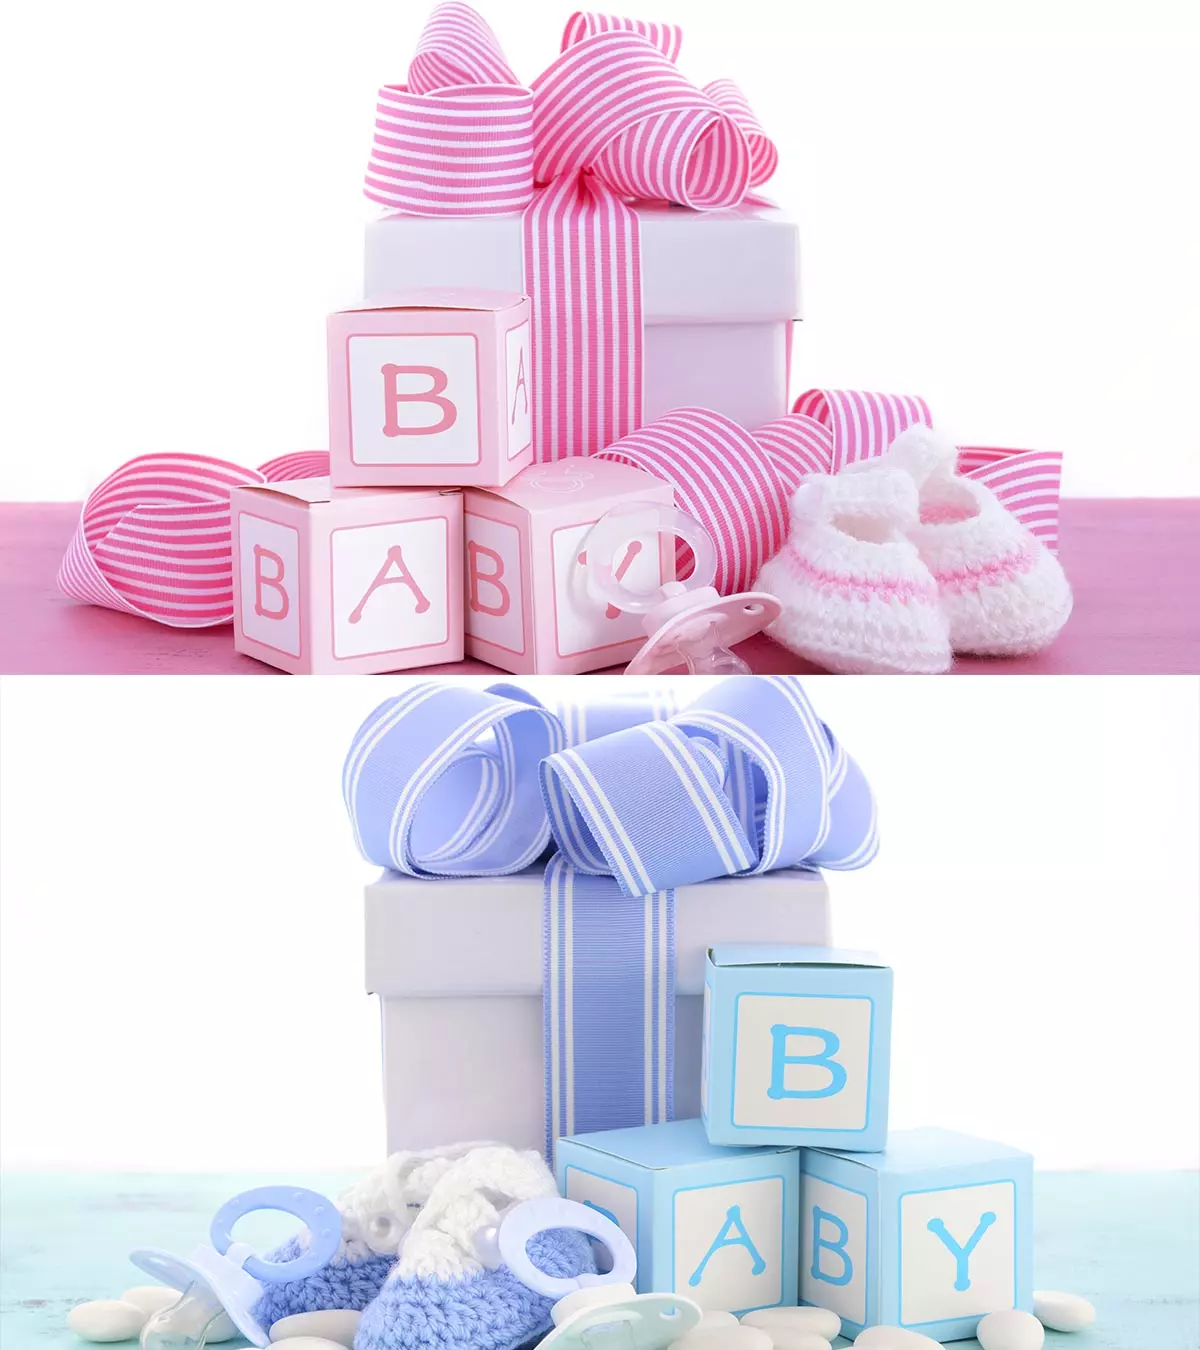 45 Fun, Unique, And Homemade Gift Ideas For Baby Shower